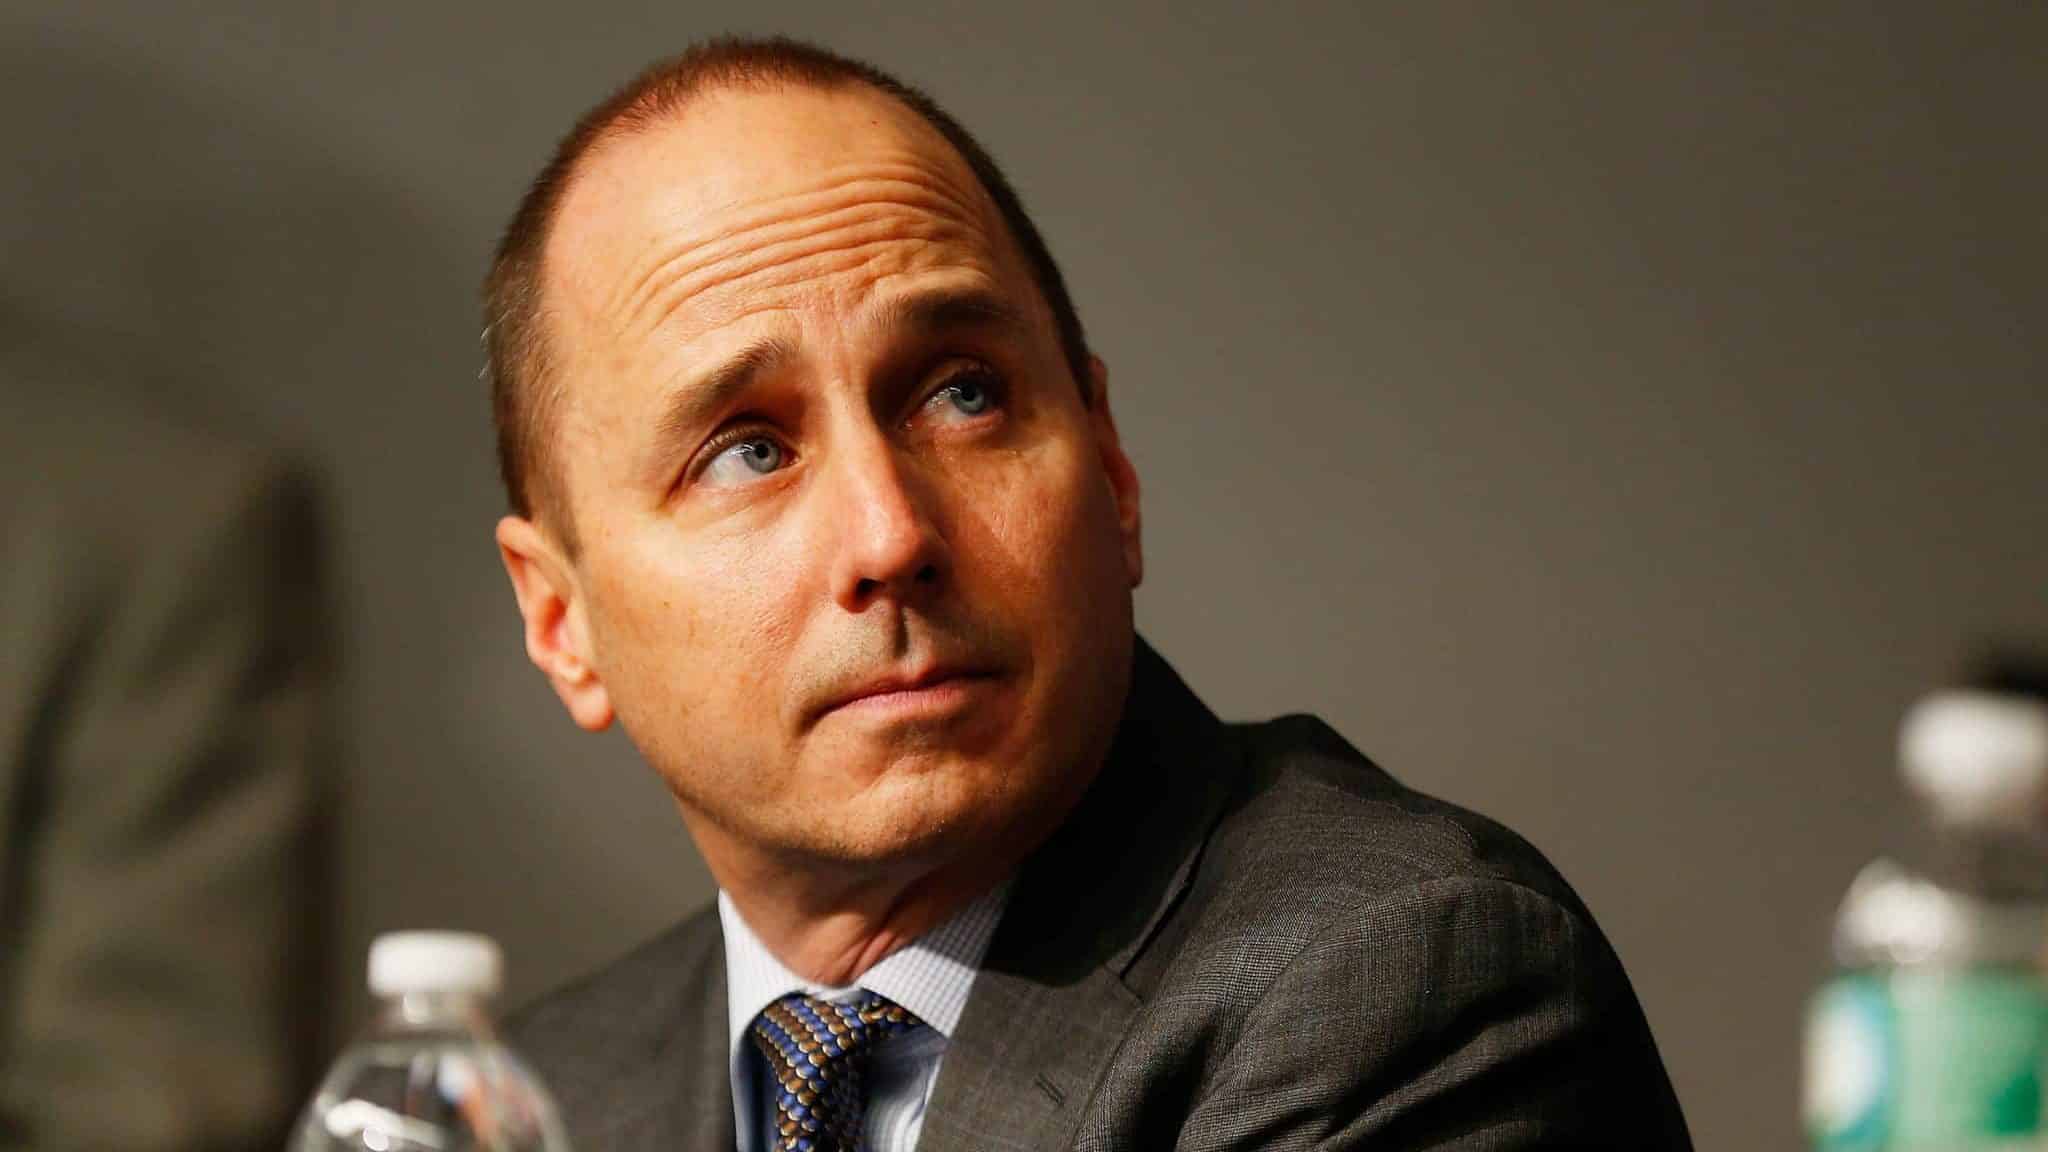 NEW YORK, NY - DECEMBER 20: General Manager Brian Cashman looks on during Carlos Beltran's introductory press conference at Yankee Stadium on December 20, 2013 in the Bronx borough of New York City.